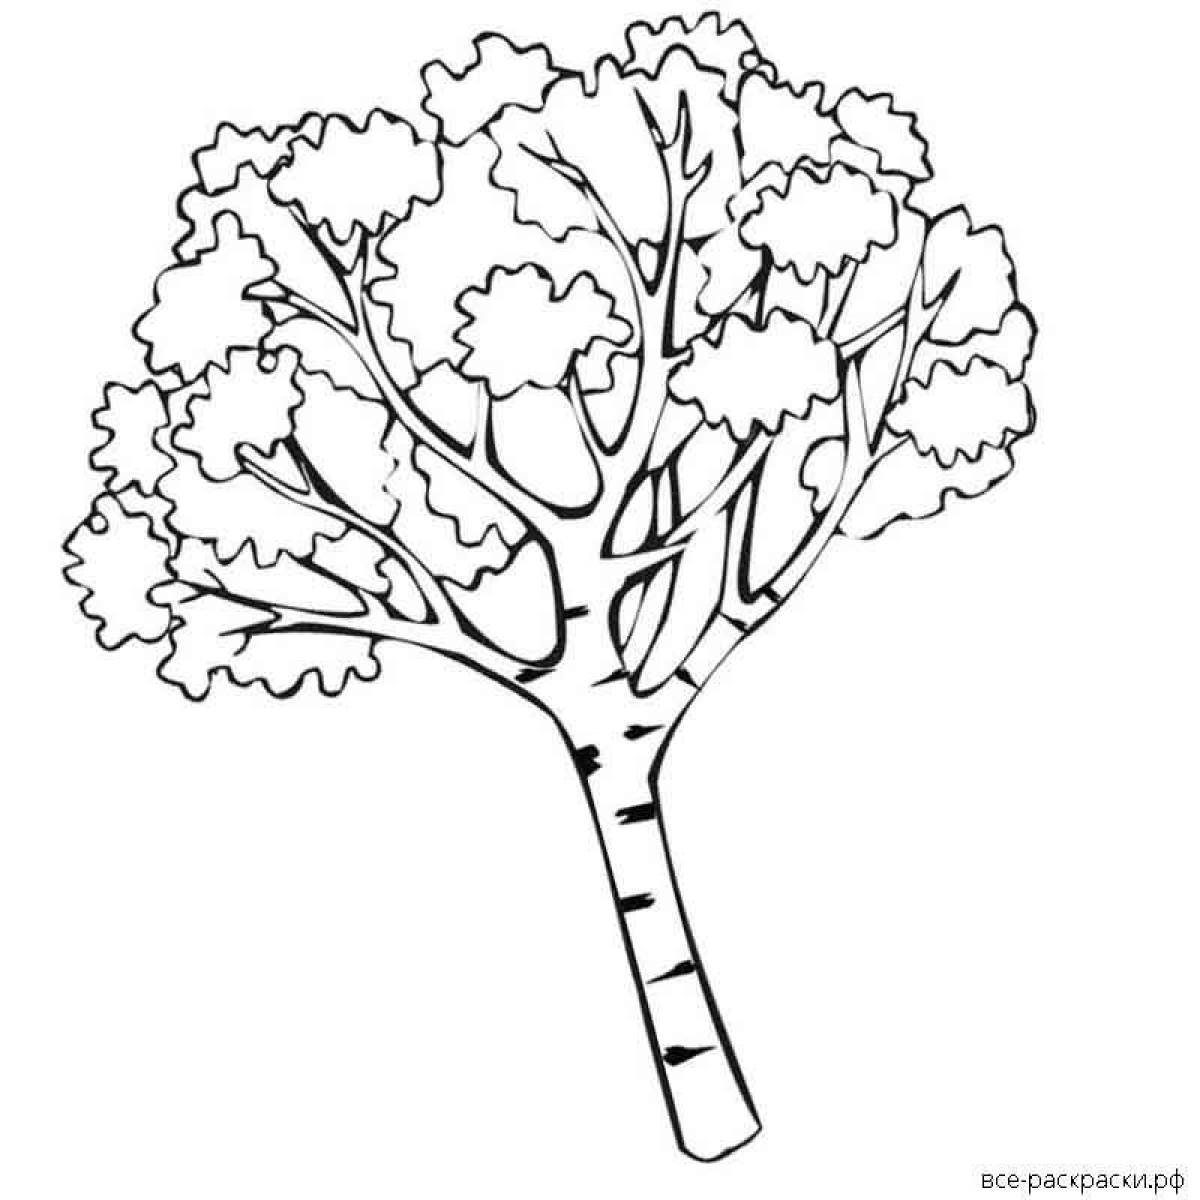 Colorful birch tree coloring page for kids